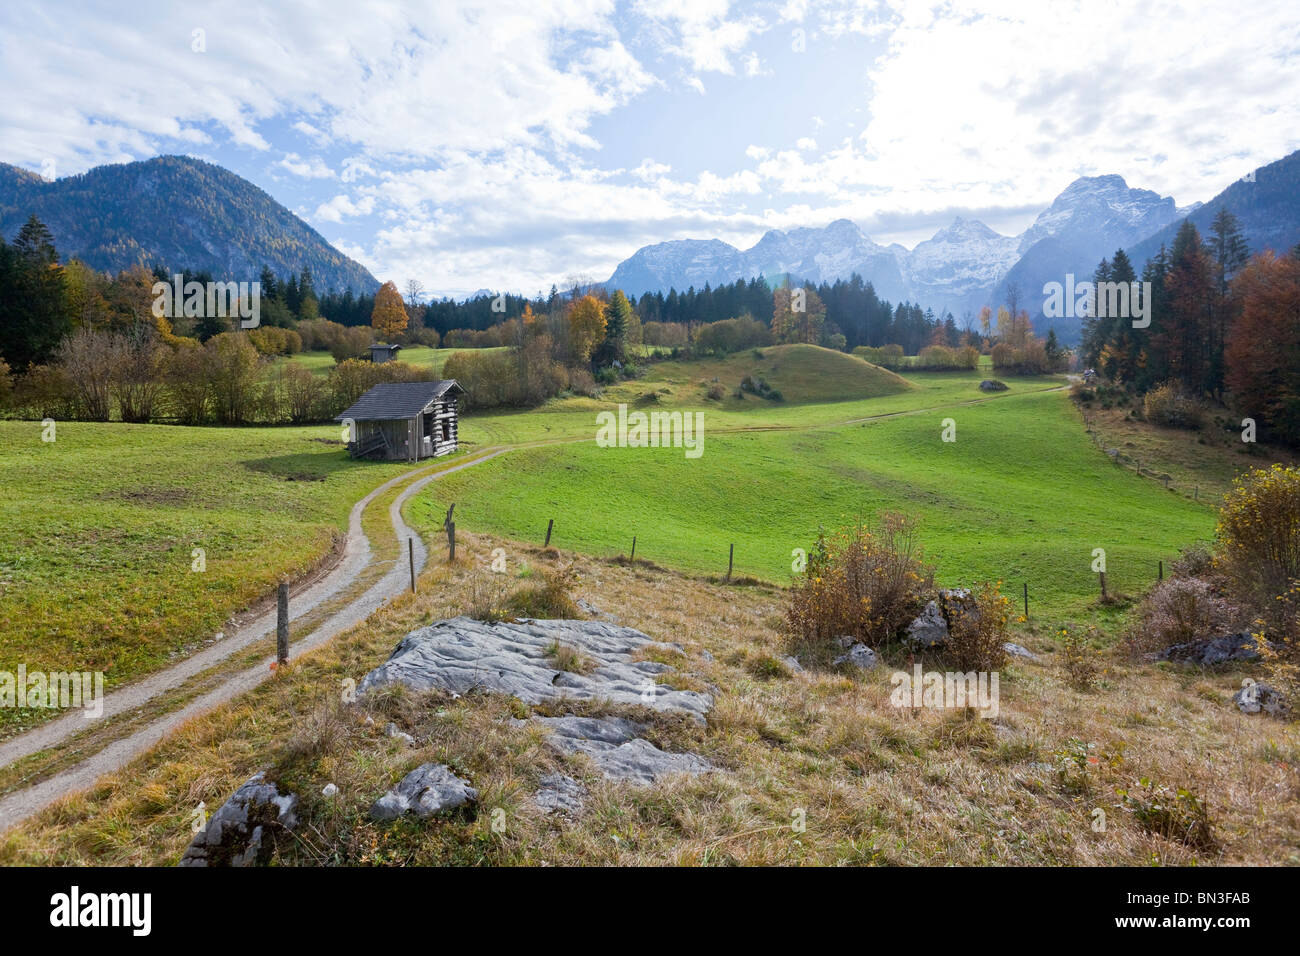 Hut at a footpath, mountains in the background, Salzburger Land, Austria  Stock Photo - Alamy